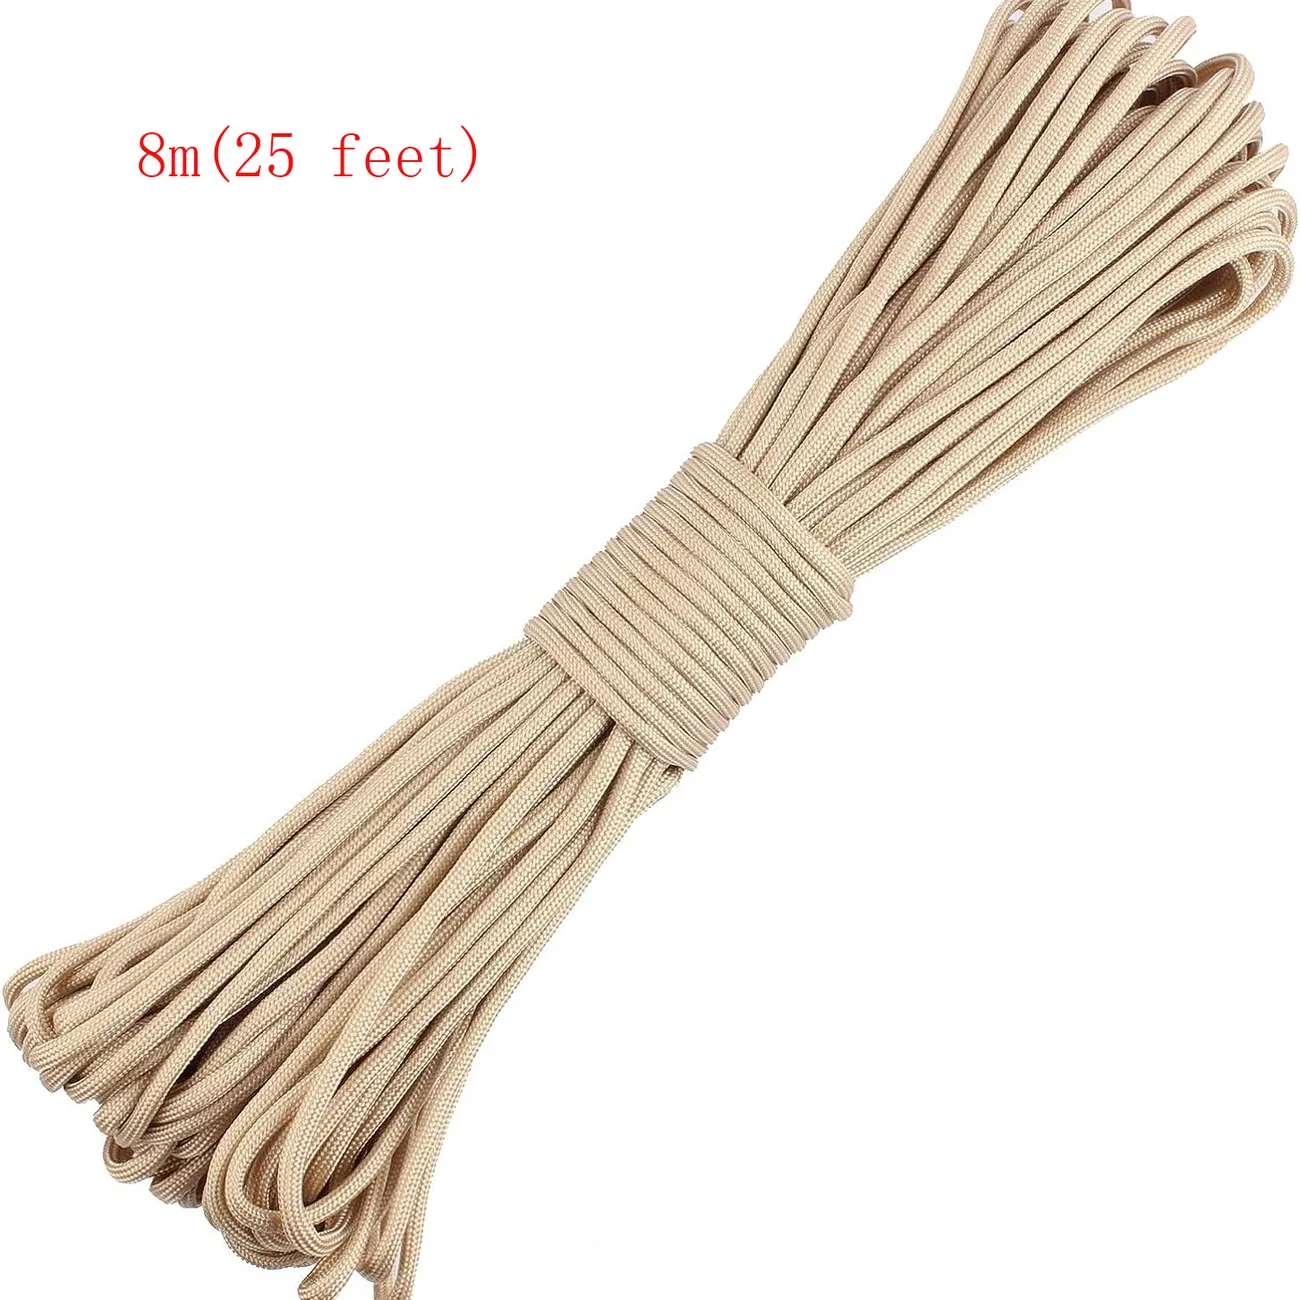 Core Tent Rope, Umbrella Rope 550 For Outdoor Sports, 60% OFF